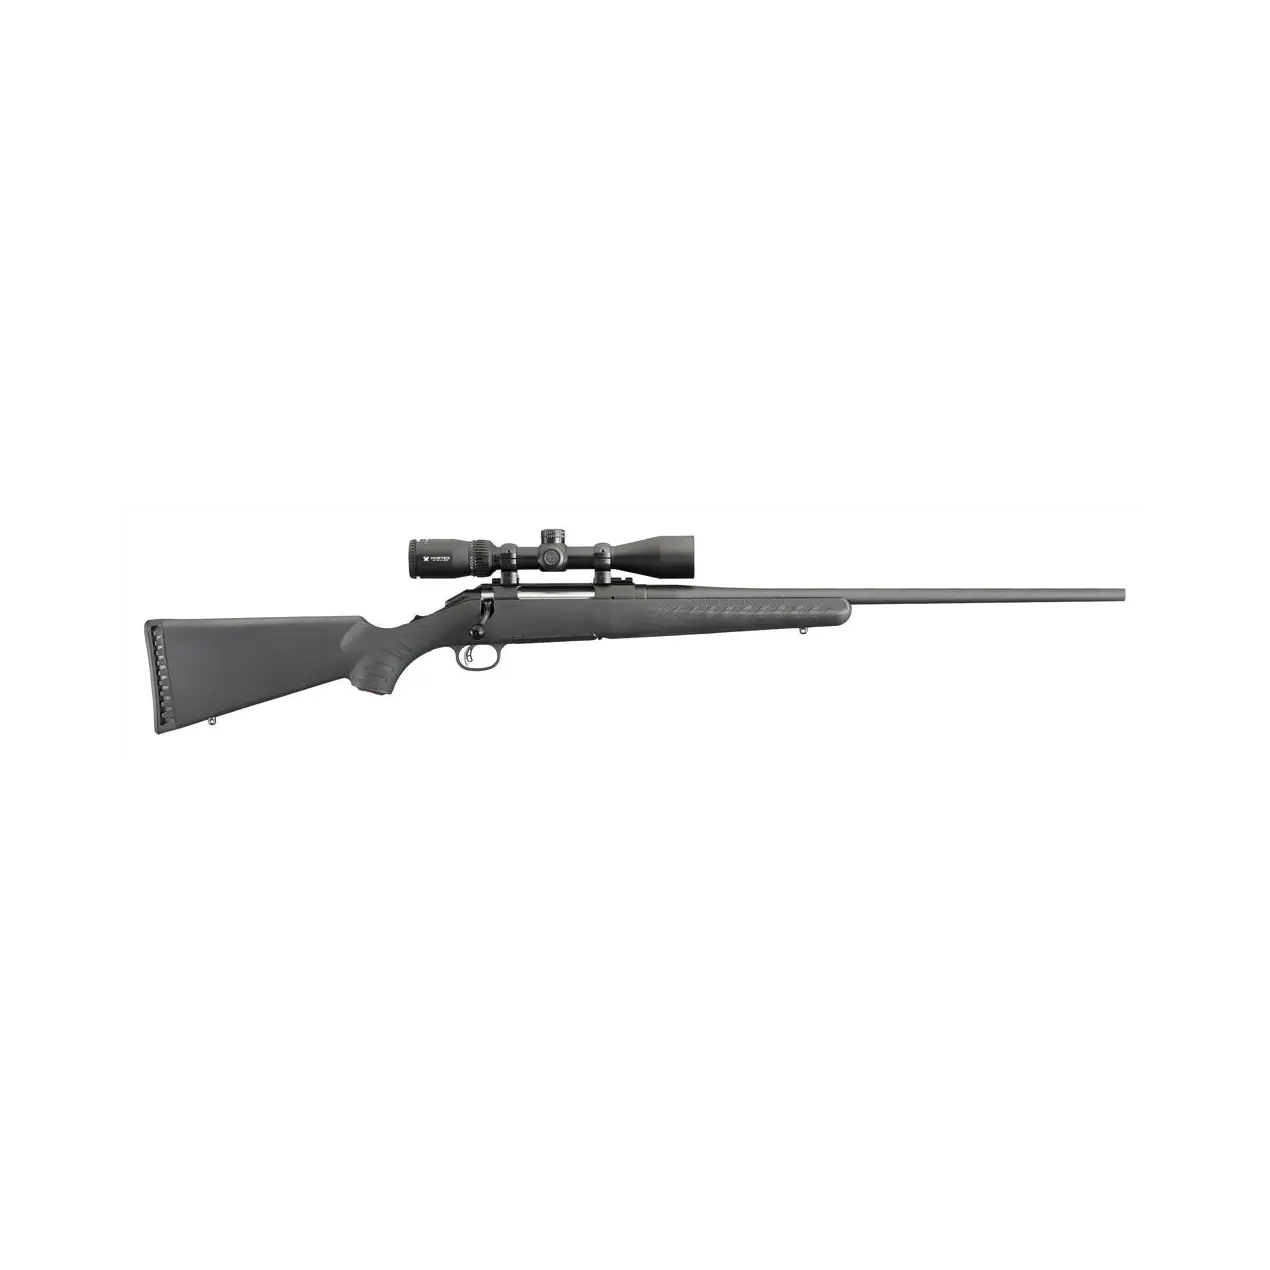 Ruger_American_308_Win-22-4Rd-Bolt_Action_Rifle